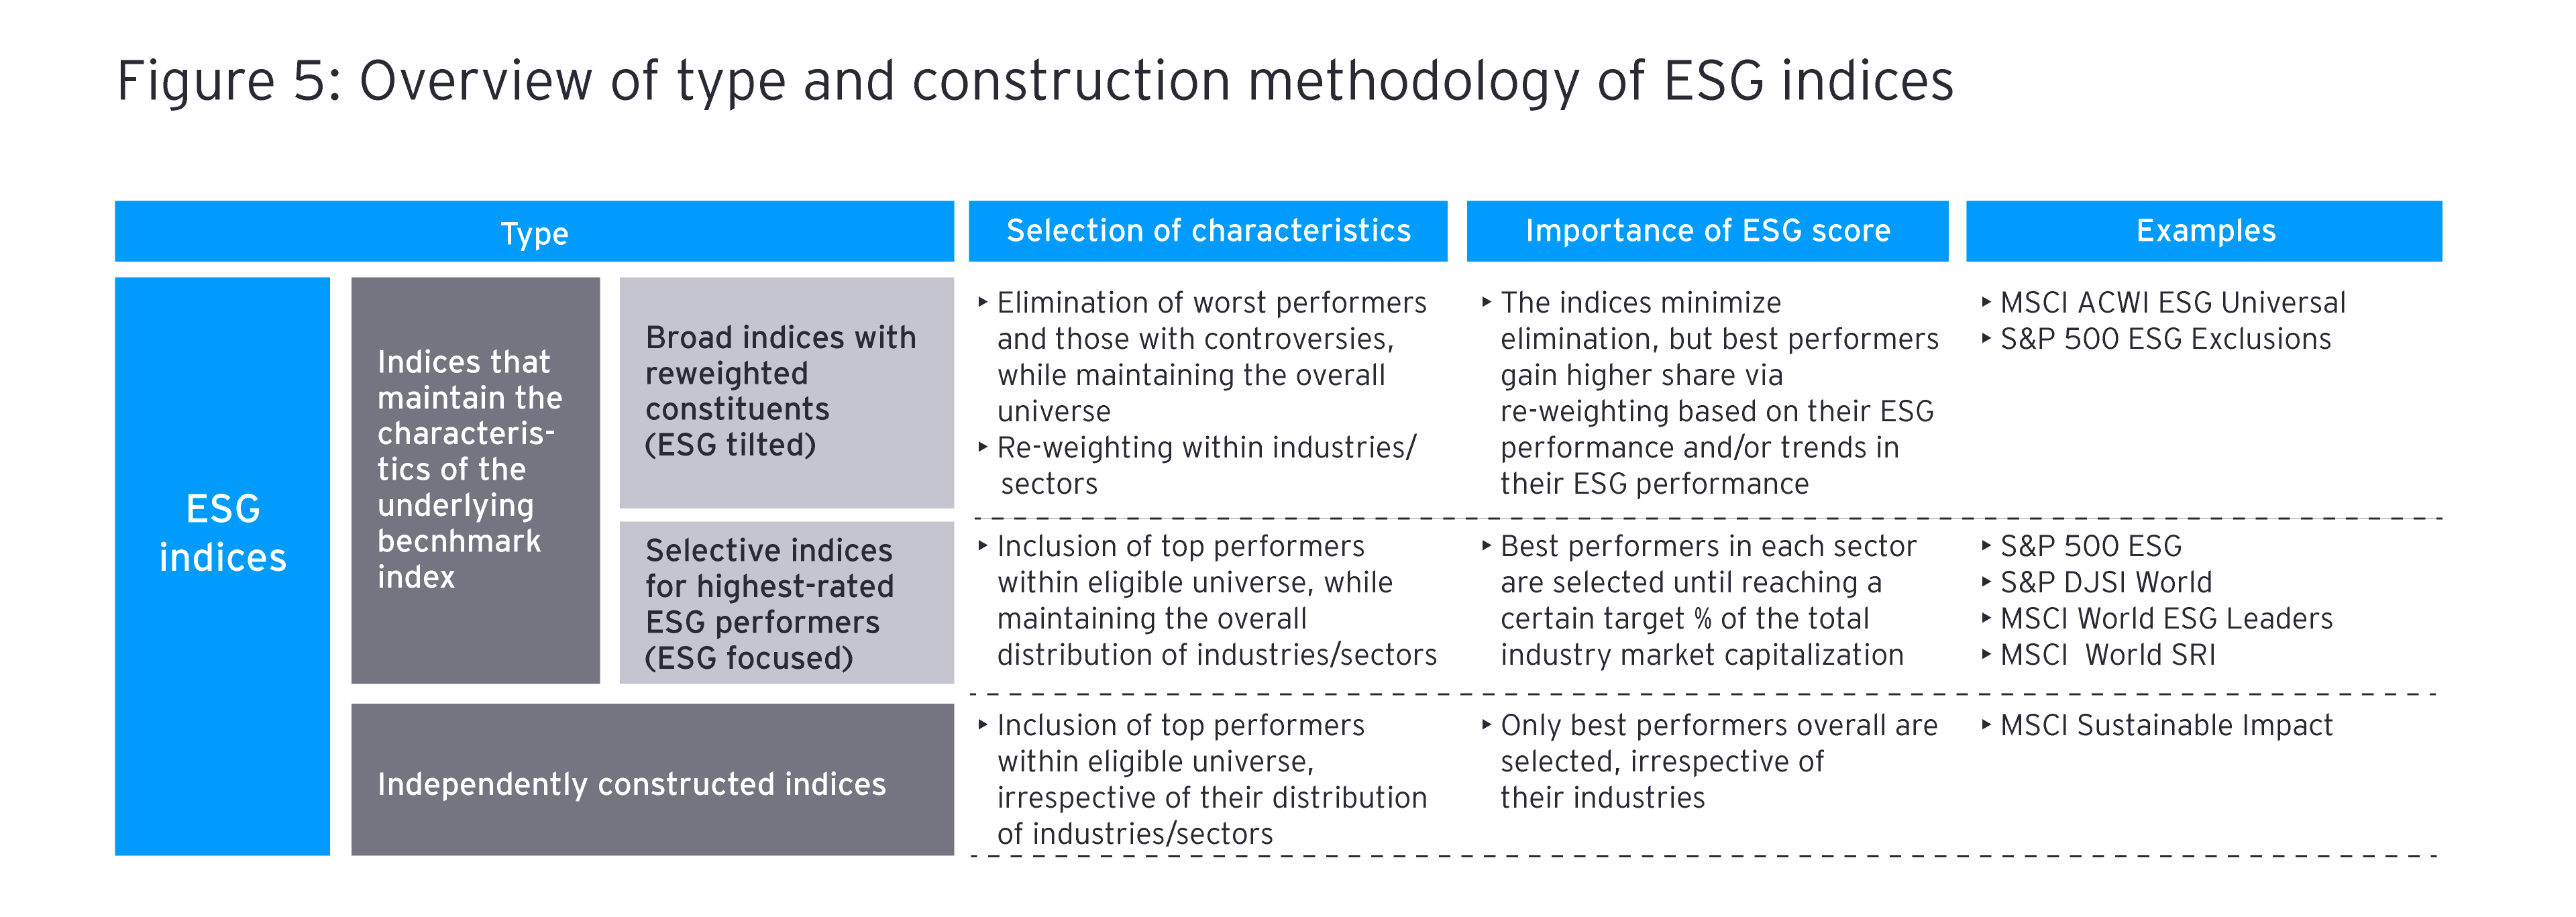 Overview of type and construction methodology of ESG indices